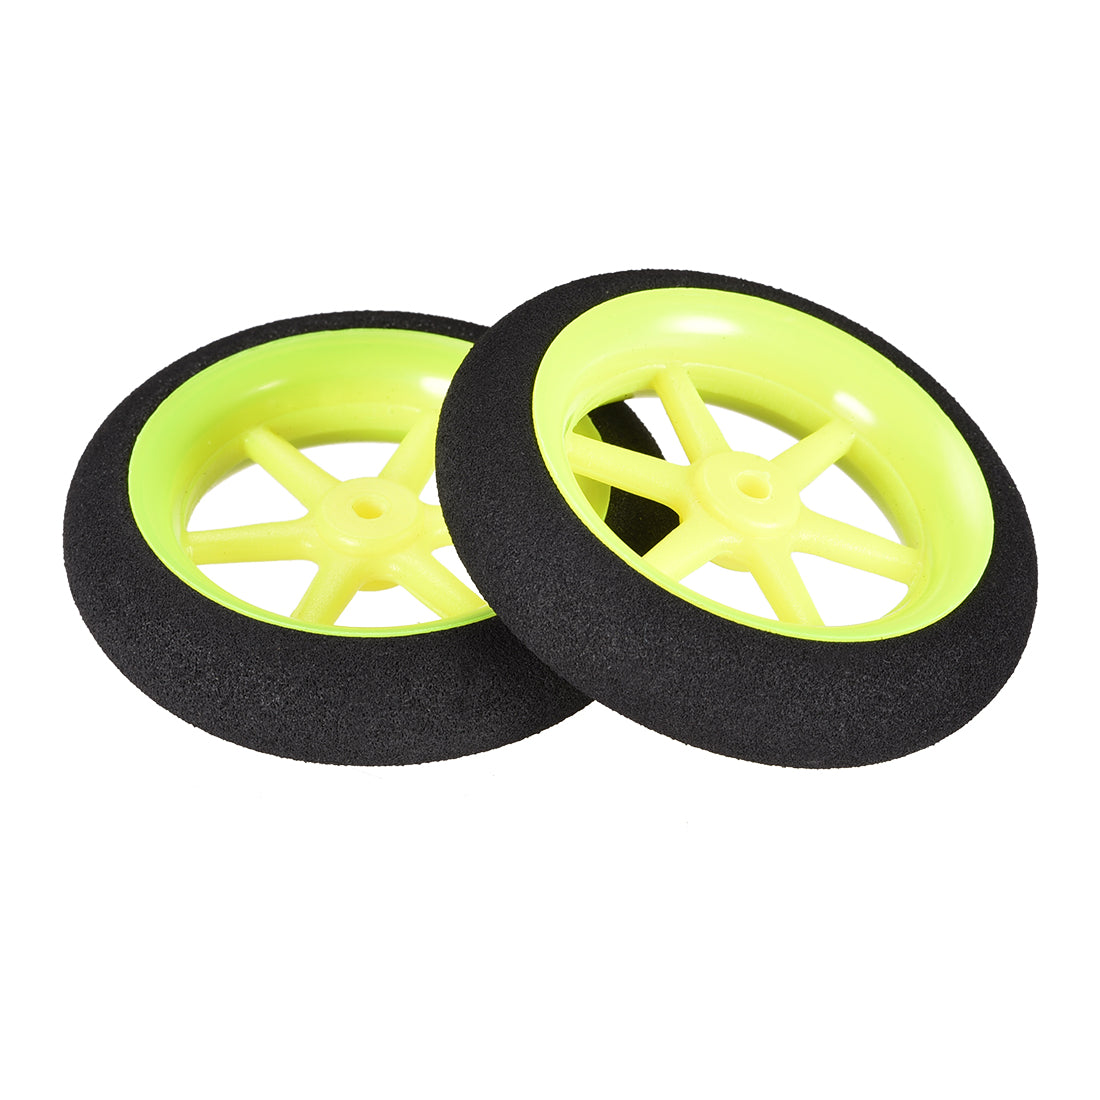 uxcell Uxcell RC Model Plane Aircraft Wheel Micro Sport Wheel 0.11 inch x 1.96 inch -   Wheel 6PCS